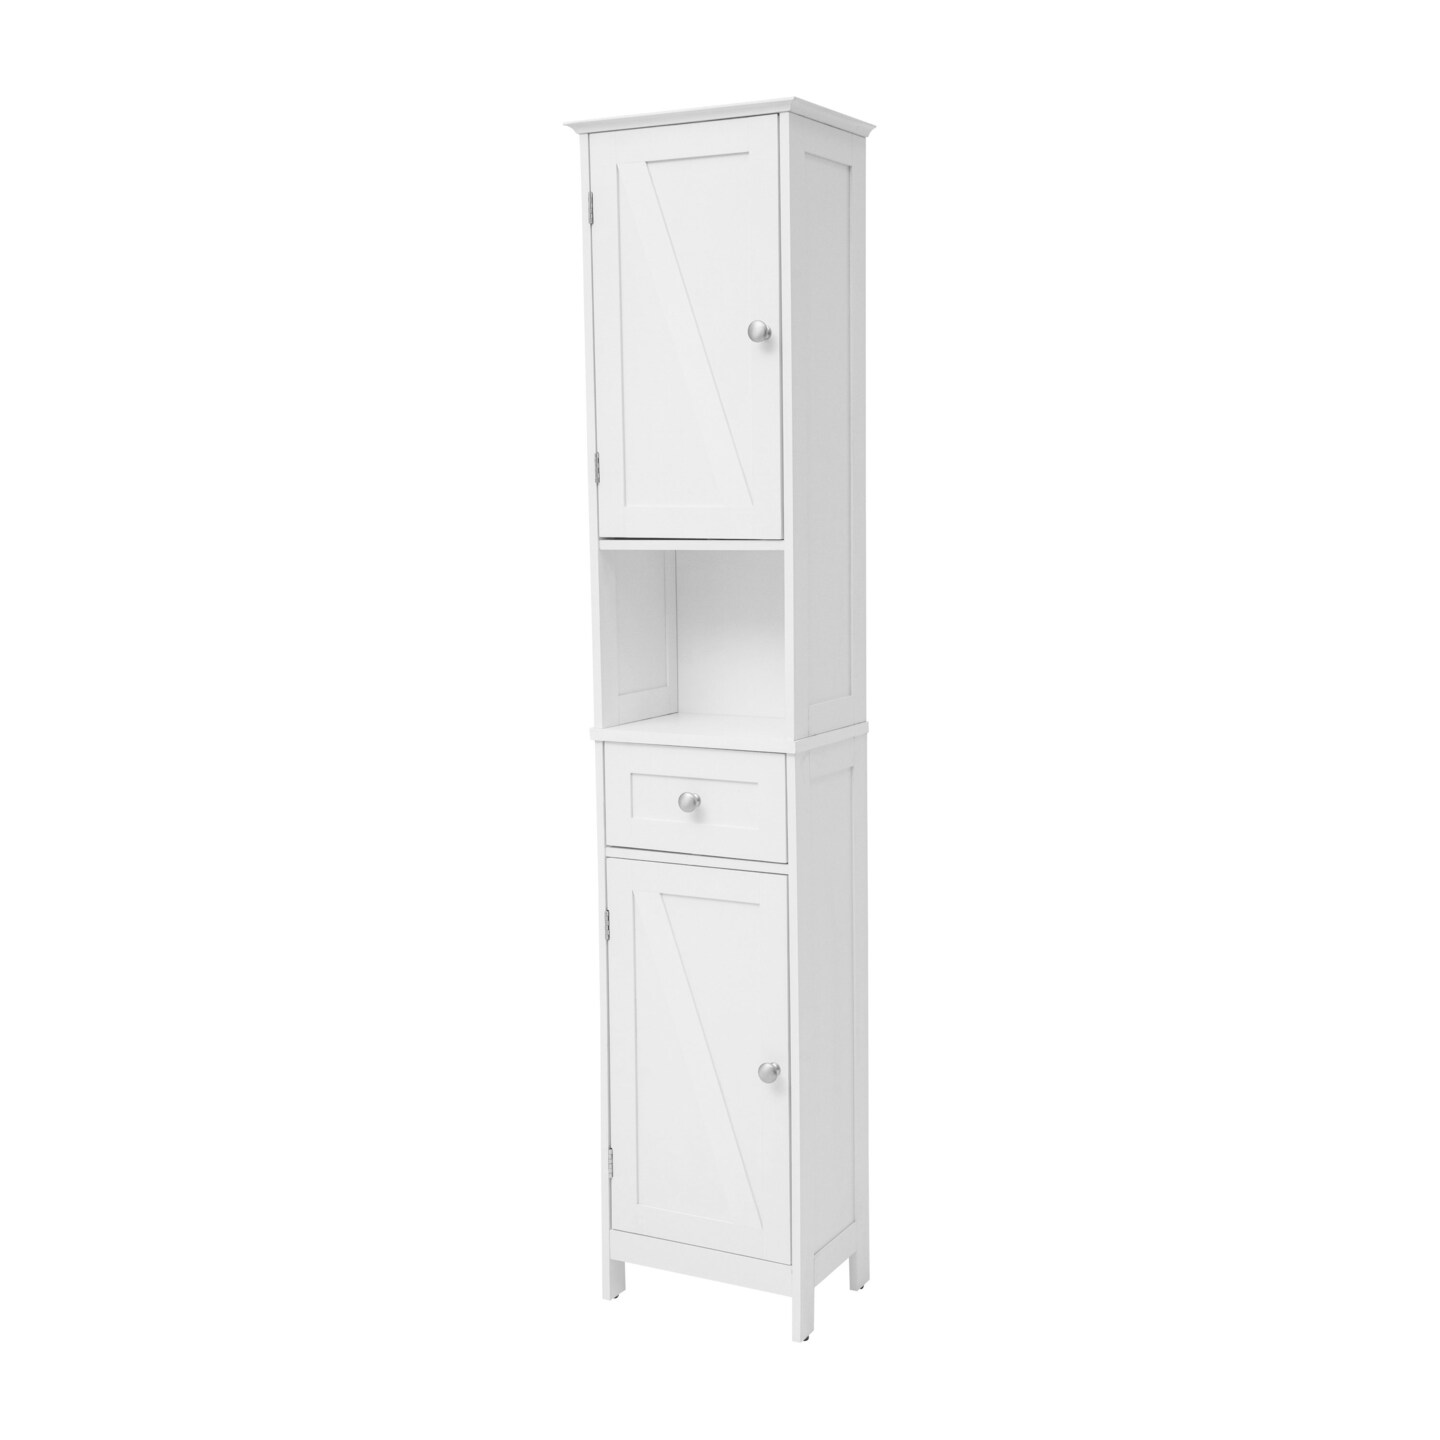 Merrick Lane Delilah Slim Linen Tower Organizer with Storage Drawer, Upper and Lower Cabinets with Magnetic Closure Doors and Open Shelf